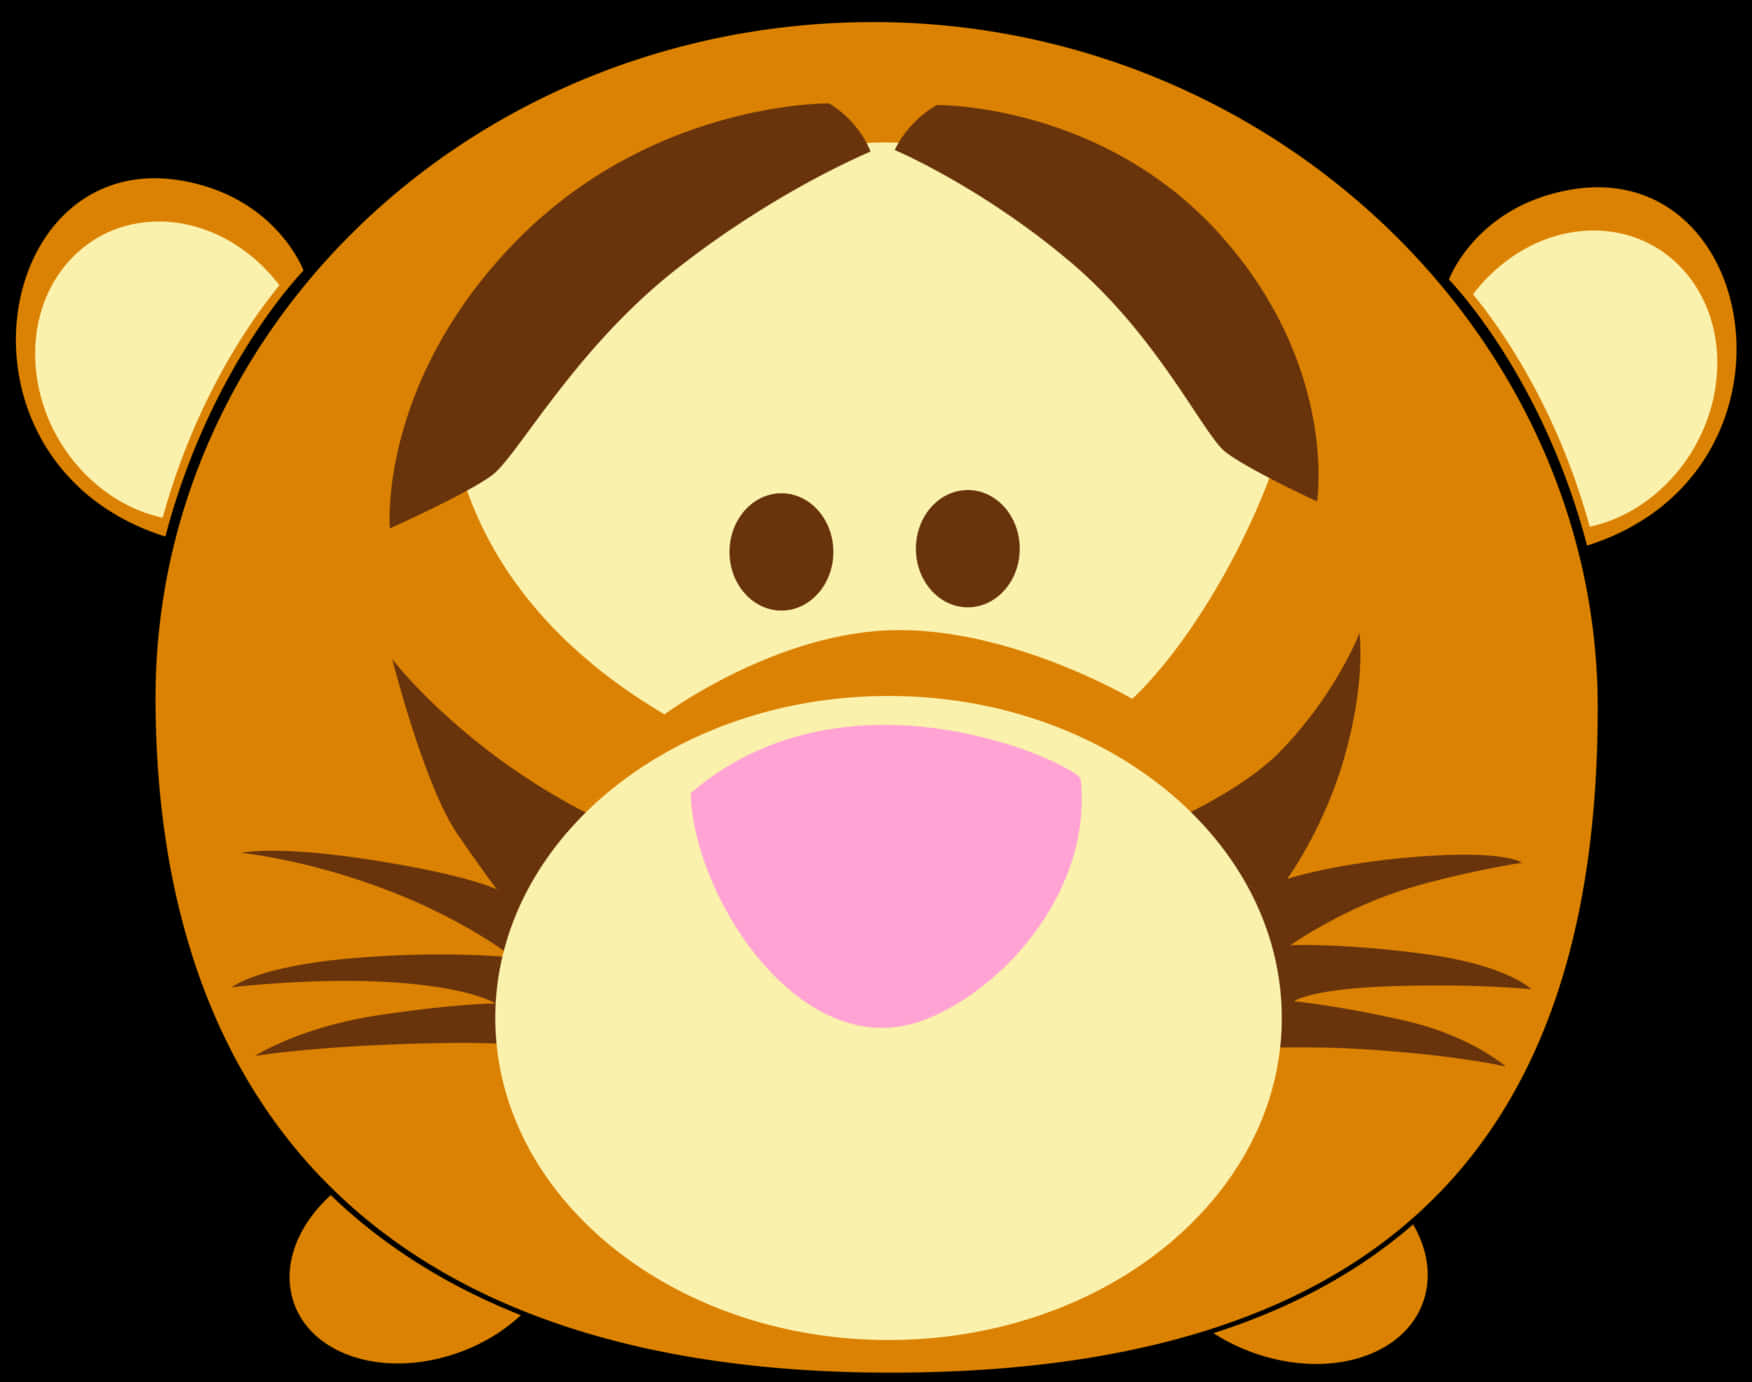 Disney Tigger Stylized Graphic PNG image